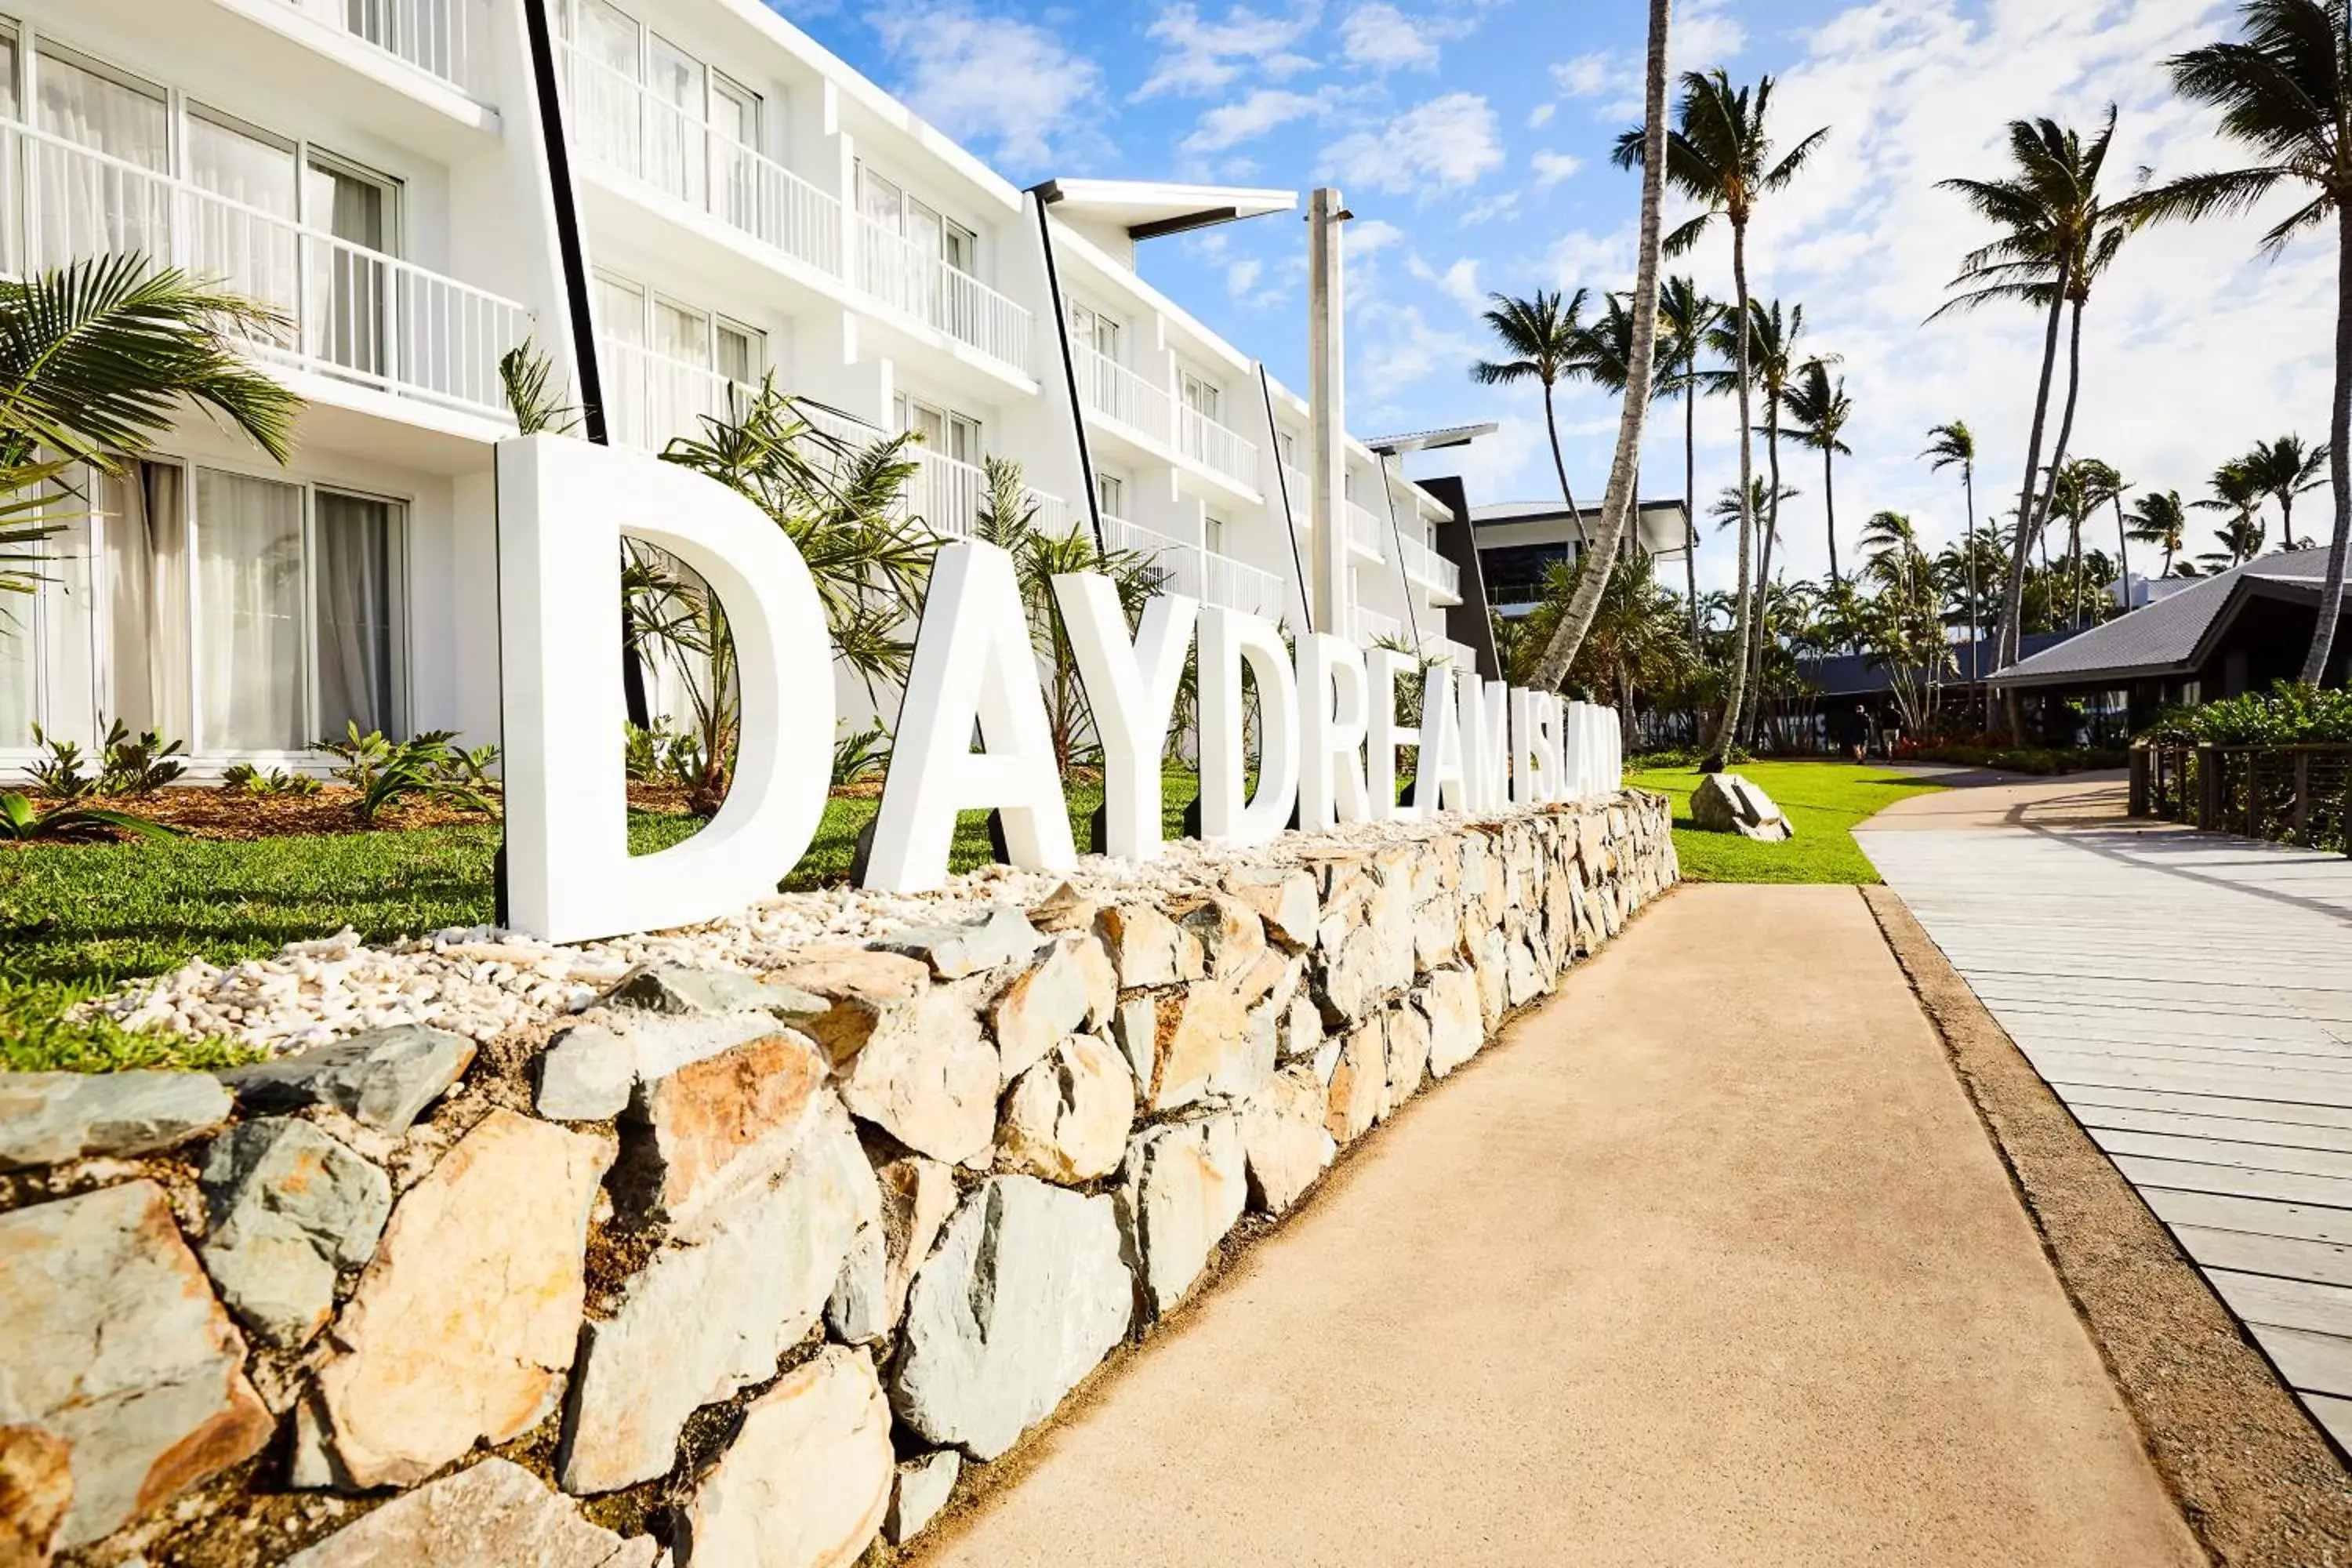 Property logo or sign, Property Building in Daydream Island Resort